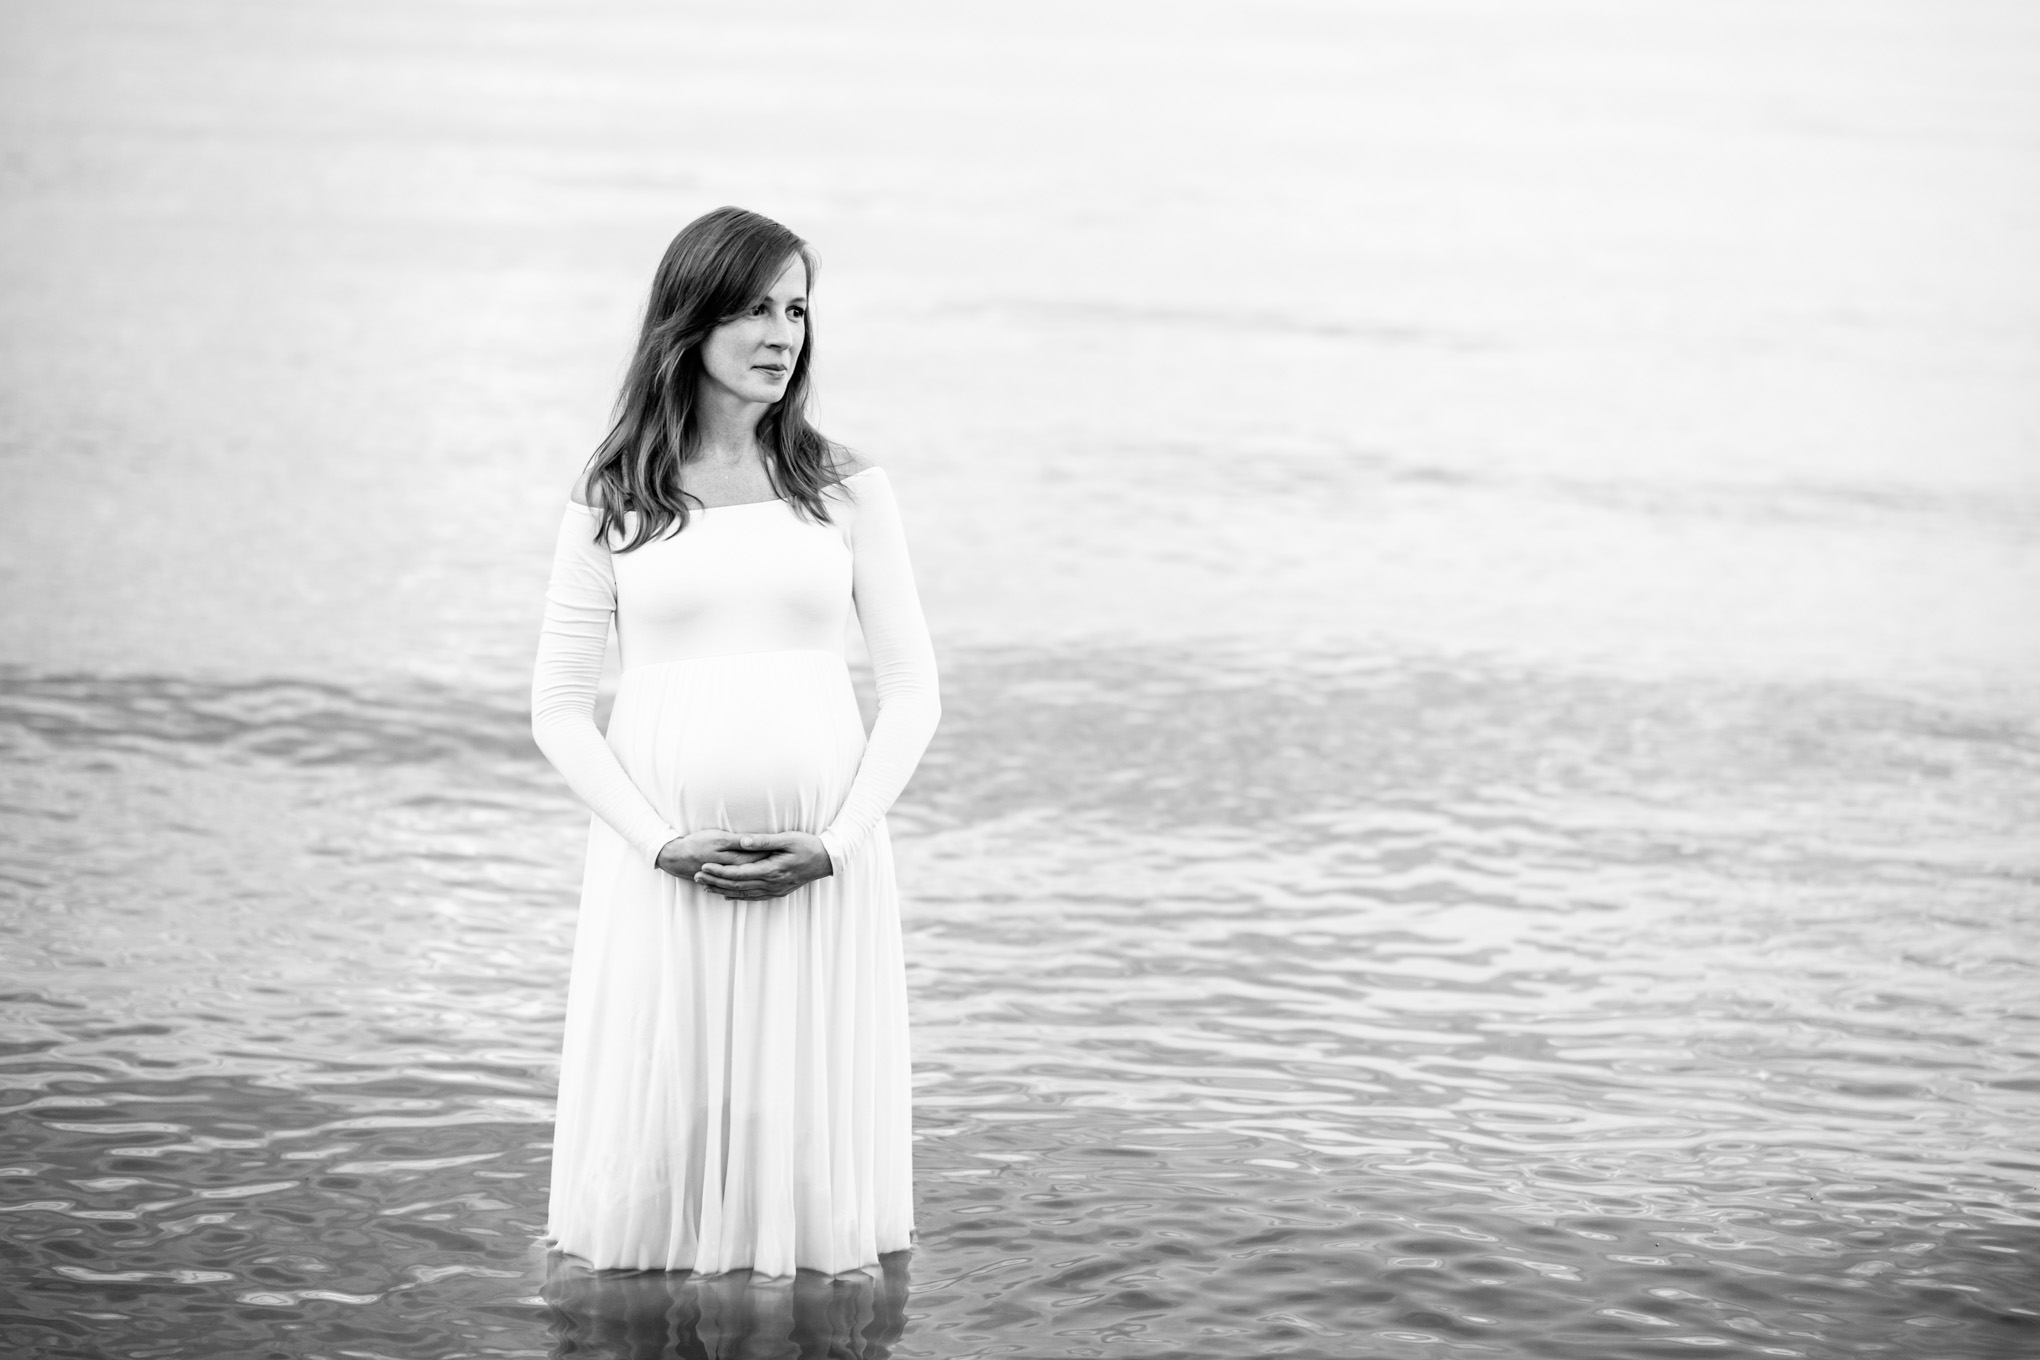 Annapolis waterfront maternity photos, Annapolis maternity photos, Annapolis maternity photographer, summer waterfront portraits, waterfront portraits, sunset portraits, sunset maternity portraits, sunset maternity photos, Annapolis photographer, DC maternity portraits, DC maternity photos, DC maternity photographer, Rachel E.H. Photography, summer maternity photos, maternity photos style, black and white portrait, woman in water